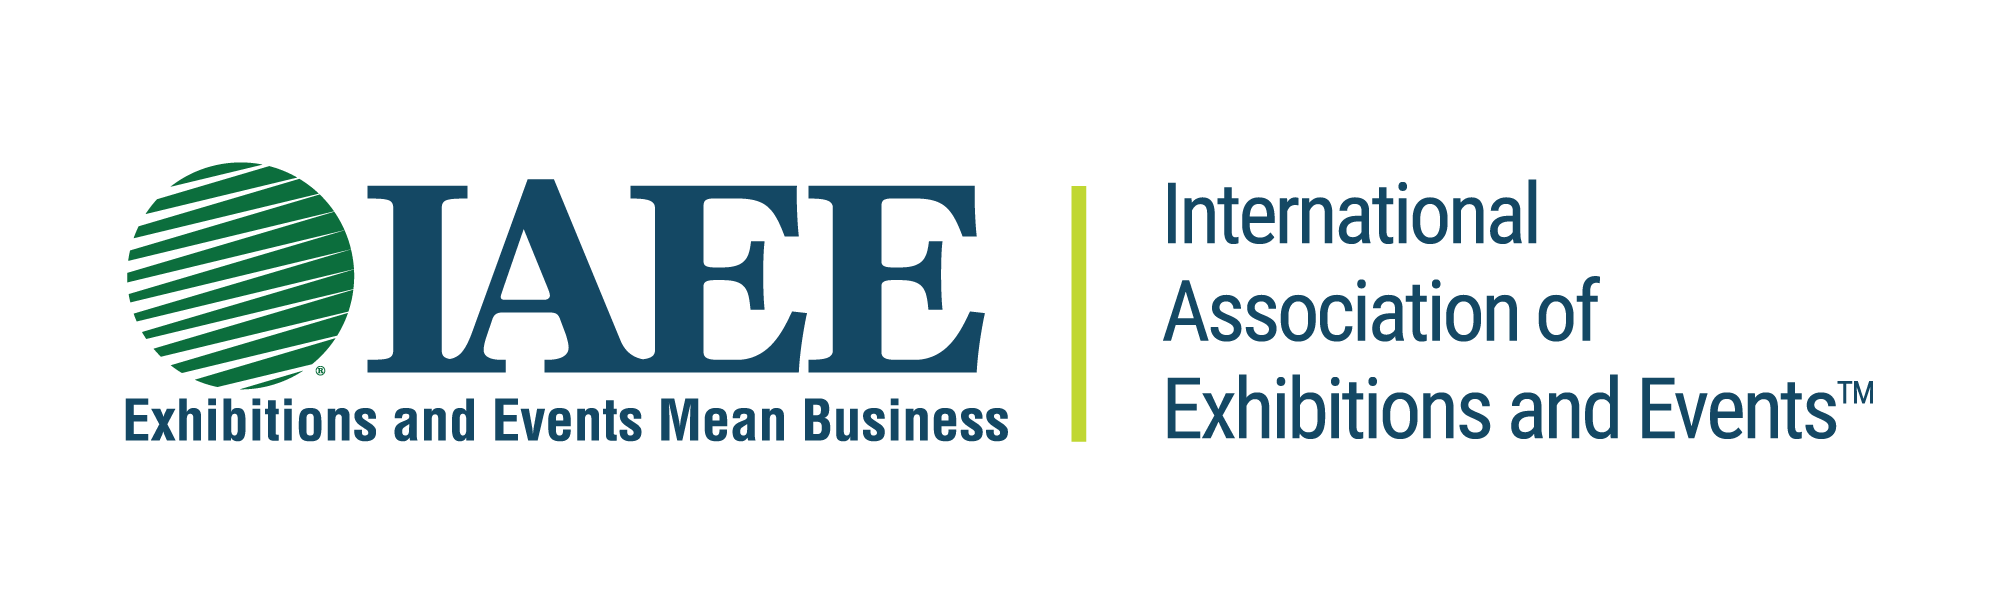 International Association of Exhibitions and Events